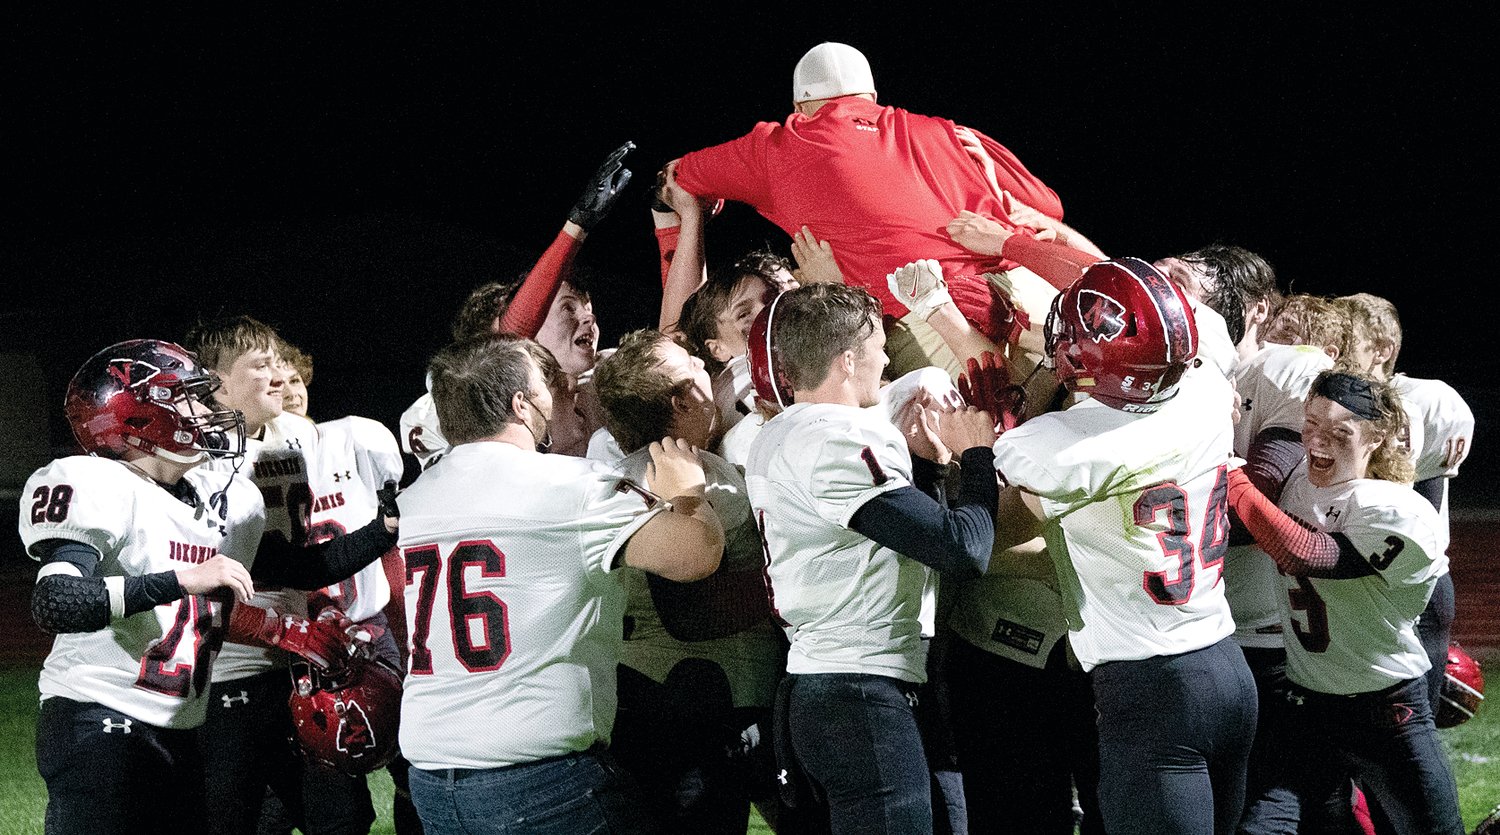 Nokomis football coach Ben Tarter showed that he still had some hops as the Redskins celebrated their 54-0 win over Red Bud on Friday, April 23. The victory secured a conference championship in the small school division of the Cahokia Conference for the Redskins as they finished the season with a perfect 6-0 record.